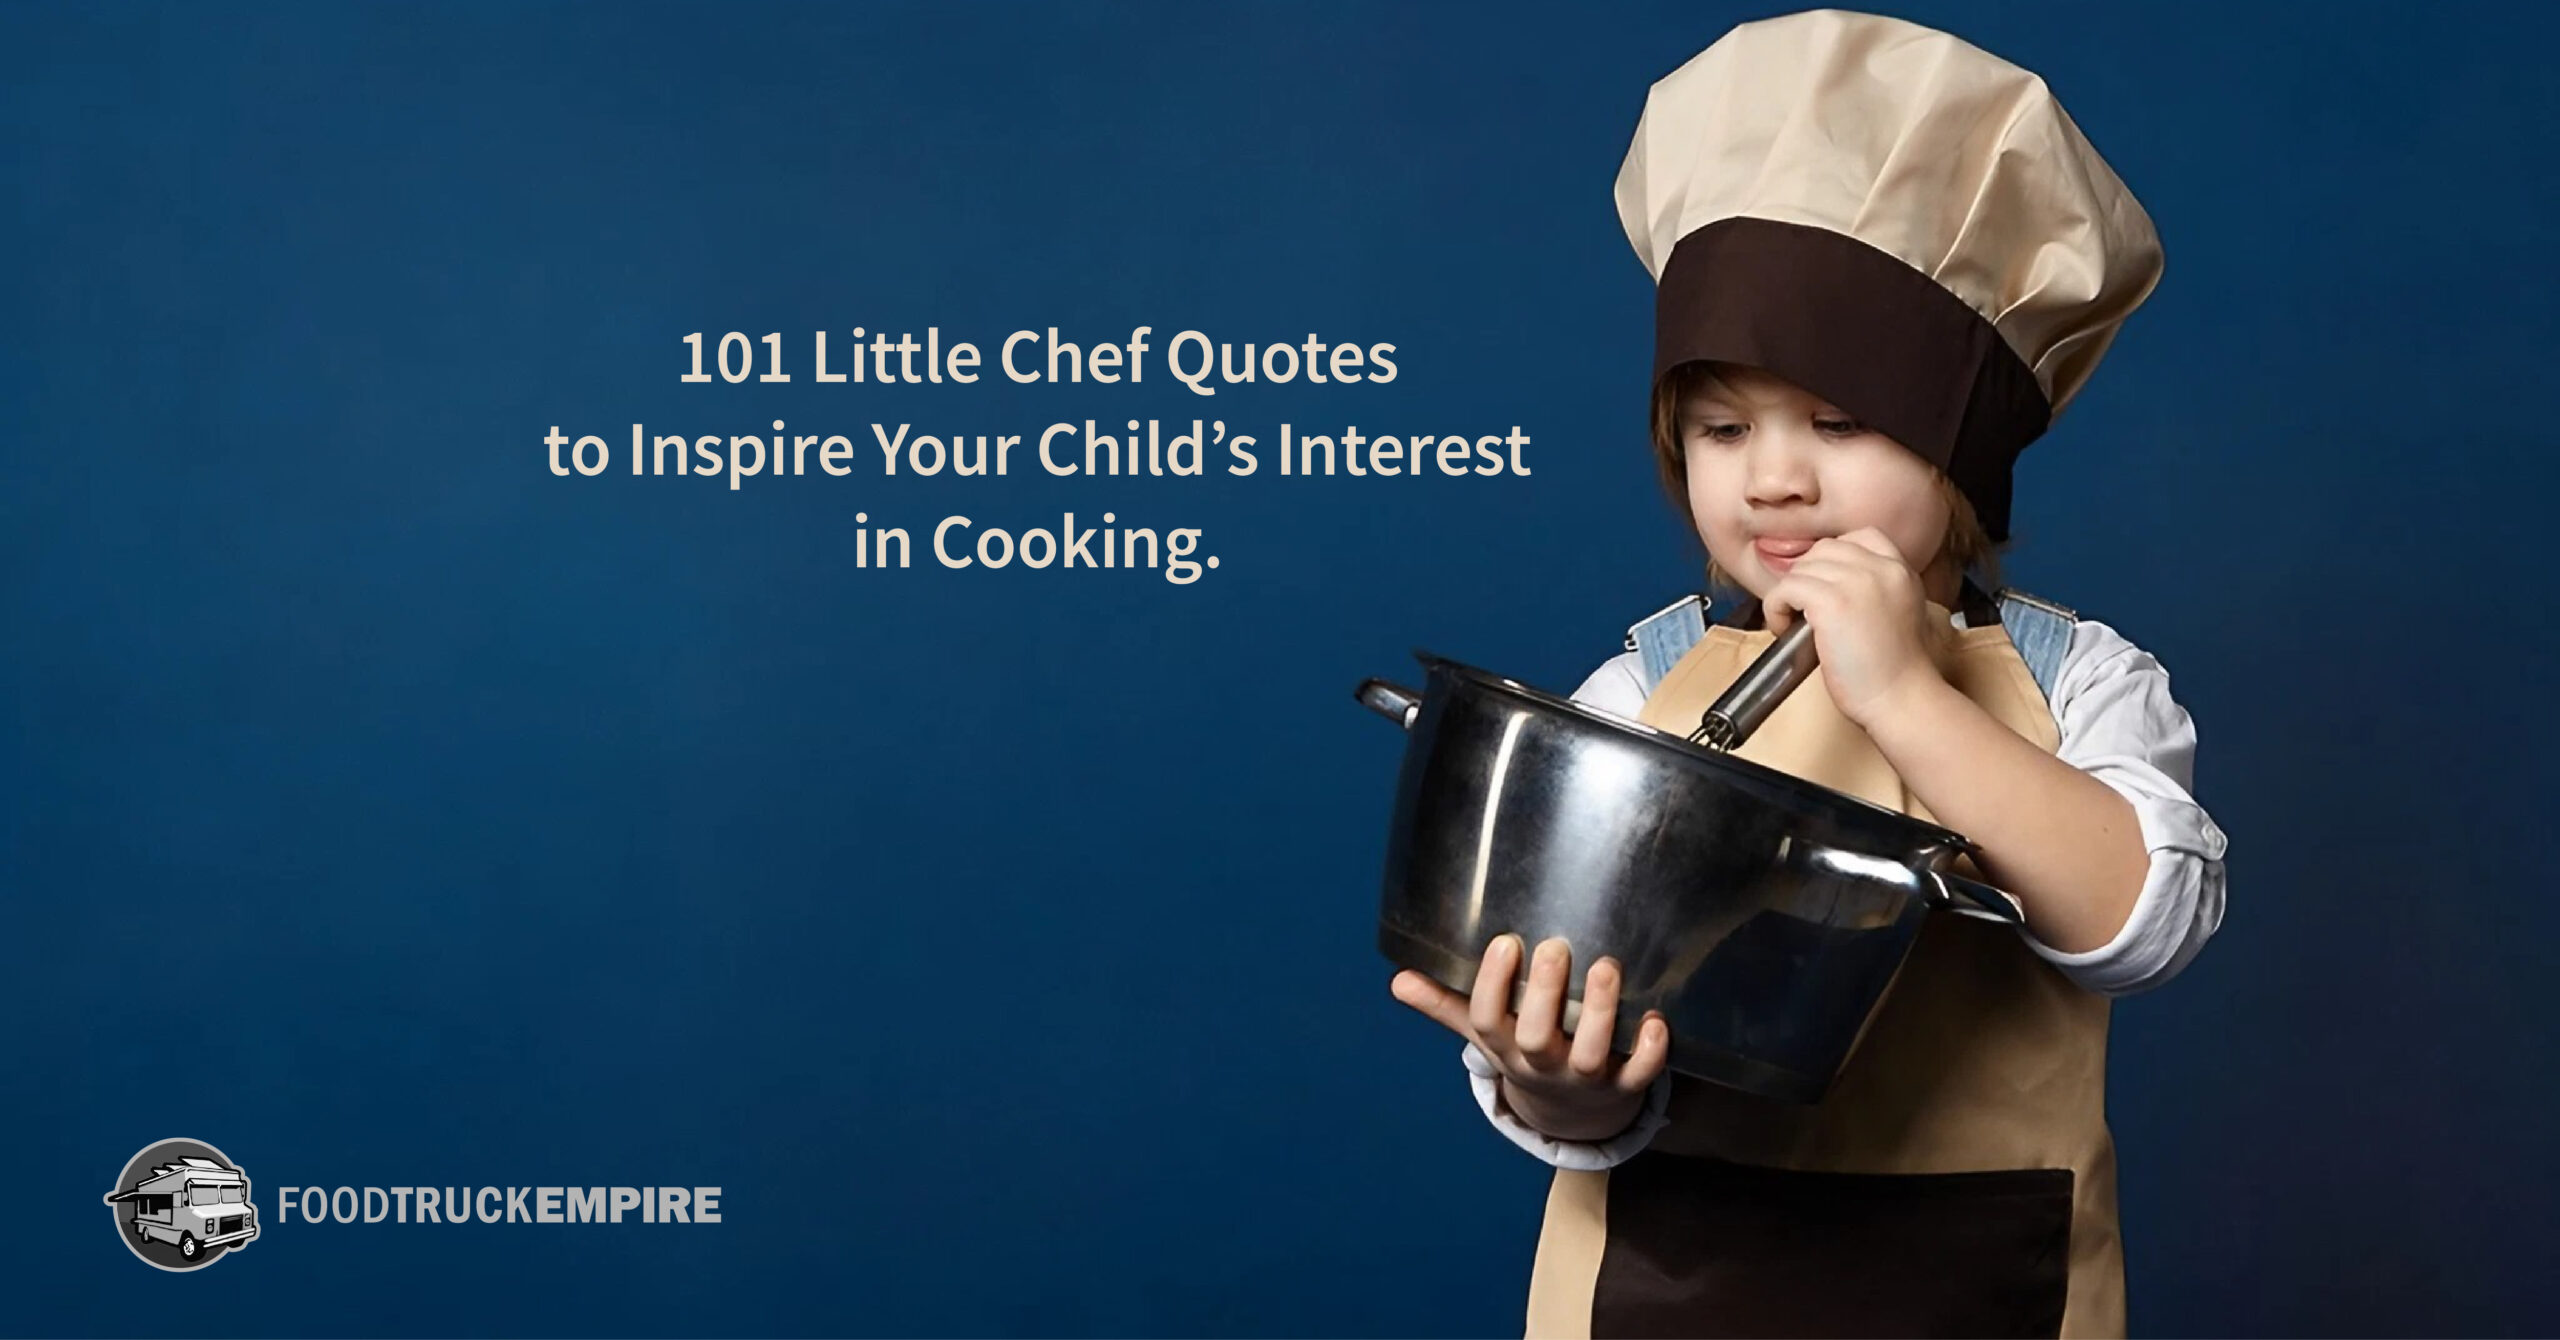 https://foodtruckempire.com/wp-content/uploads/Featured-Image-Little-Chef-Quotes-scaled.jpg